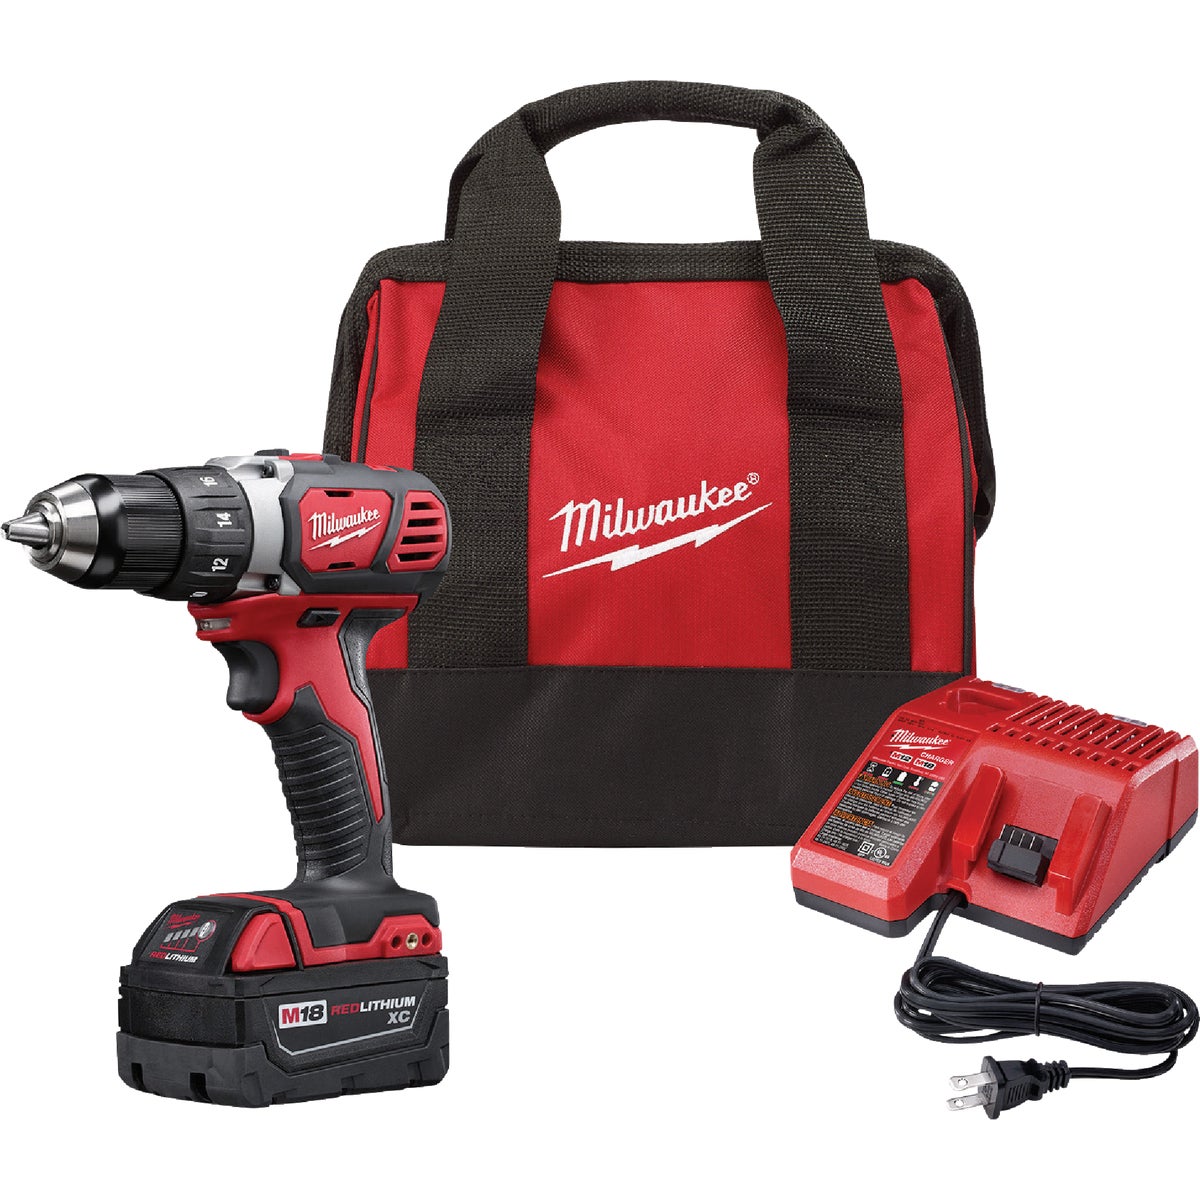 Milwaukee M18 1/2 In. Compact Cordless Drill/Driver Kit